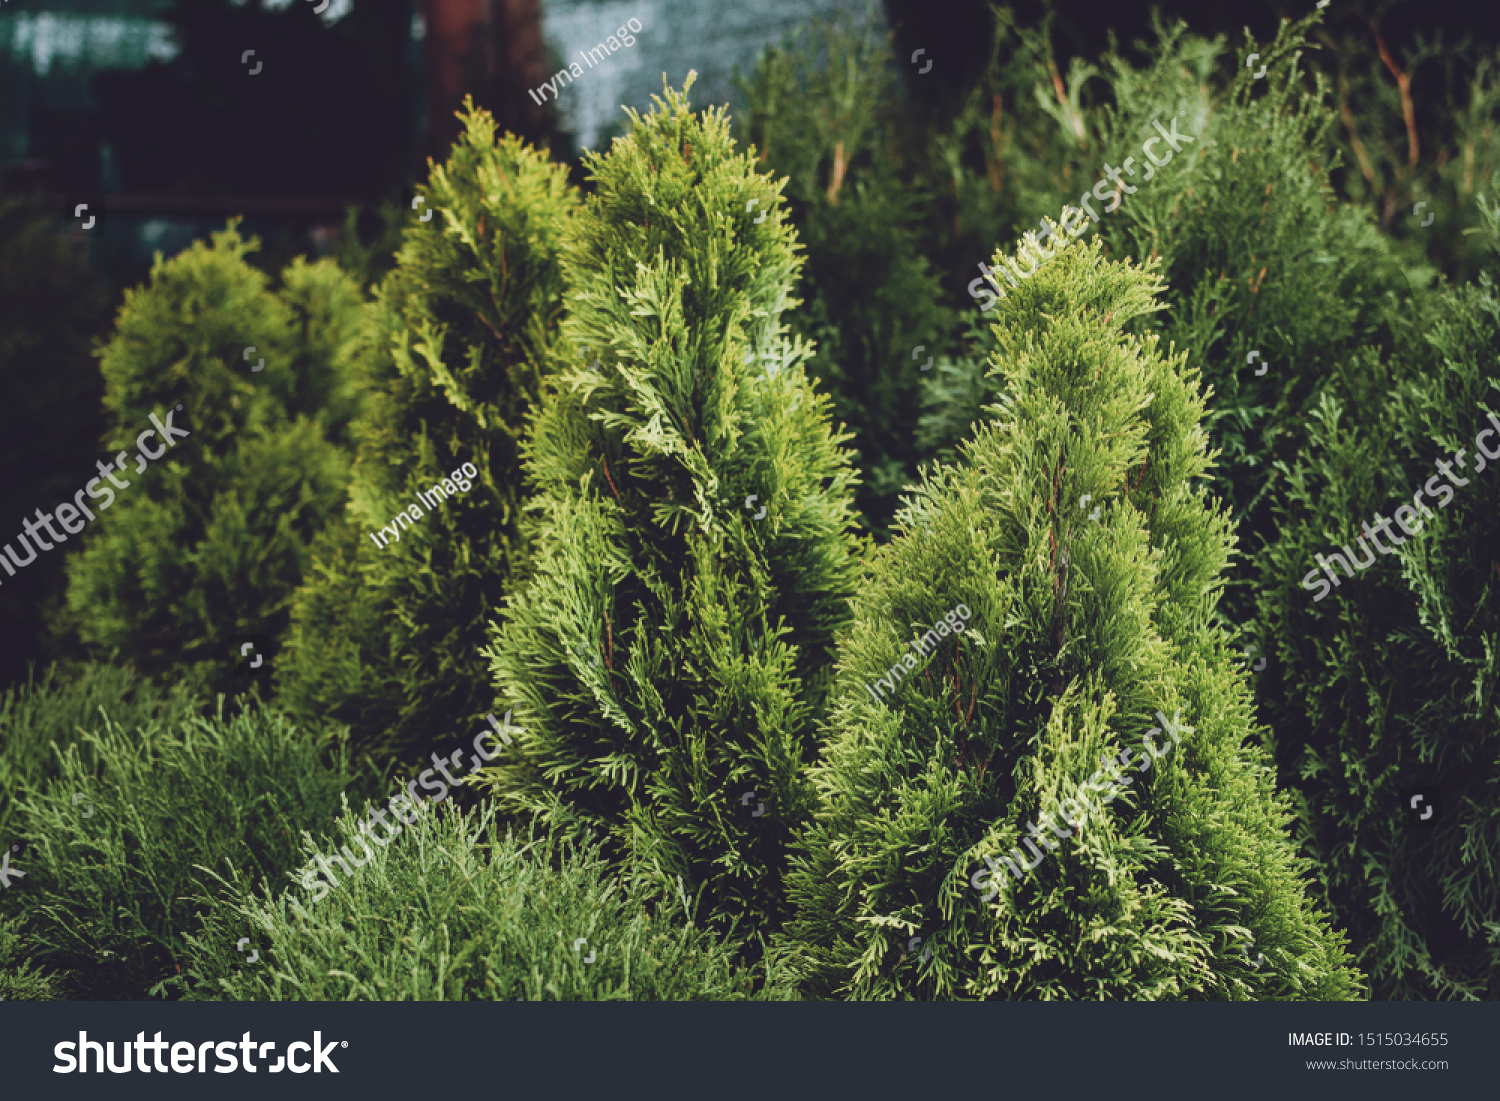 Christmas tree shop. Christmas trees spruce in pots for sale. Various evergreen conifers trees in pots. #1515034655